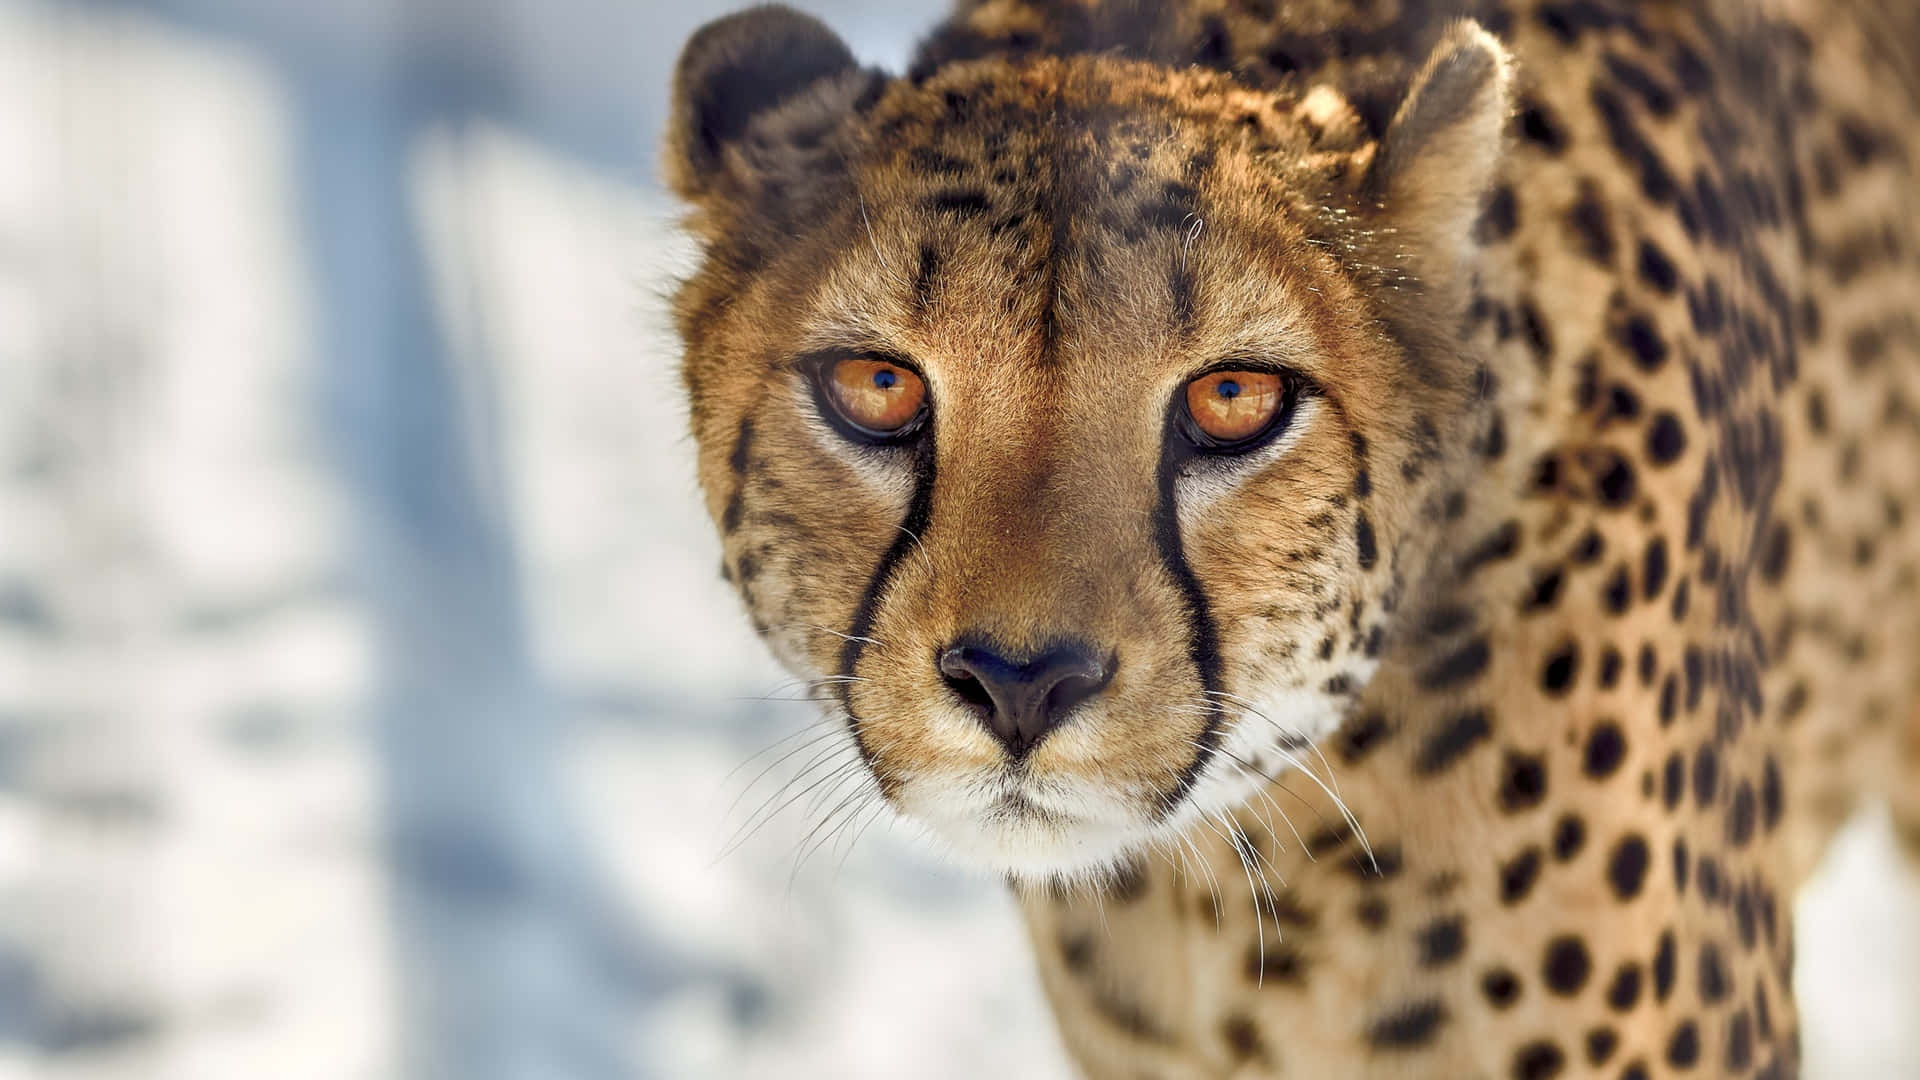 A Closeup of a Powerful and Majestic Cheetah in the Golden African Savannah Wallpaper